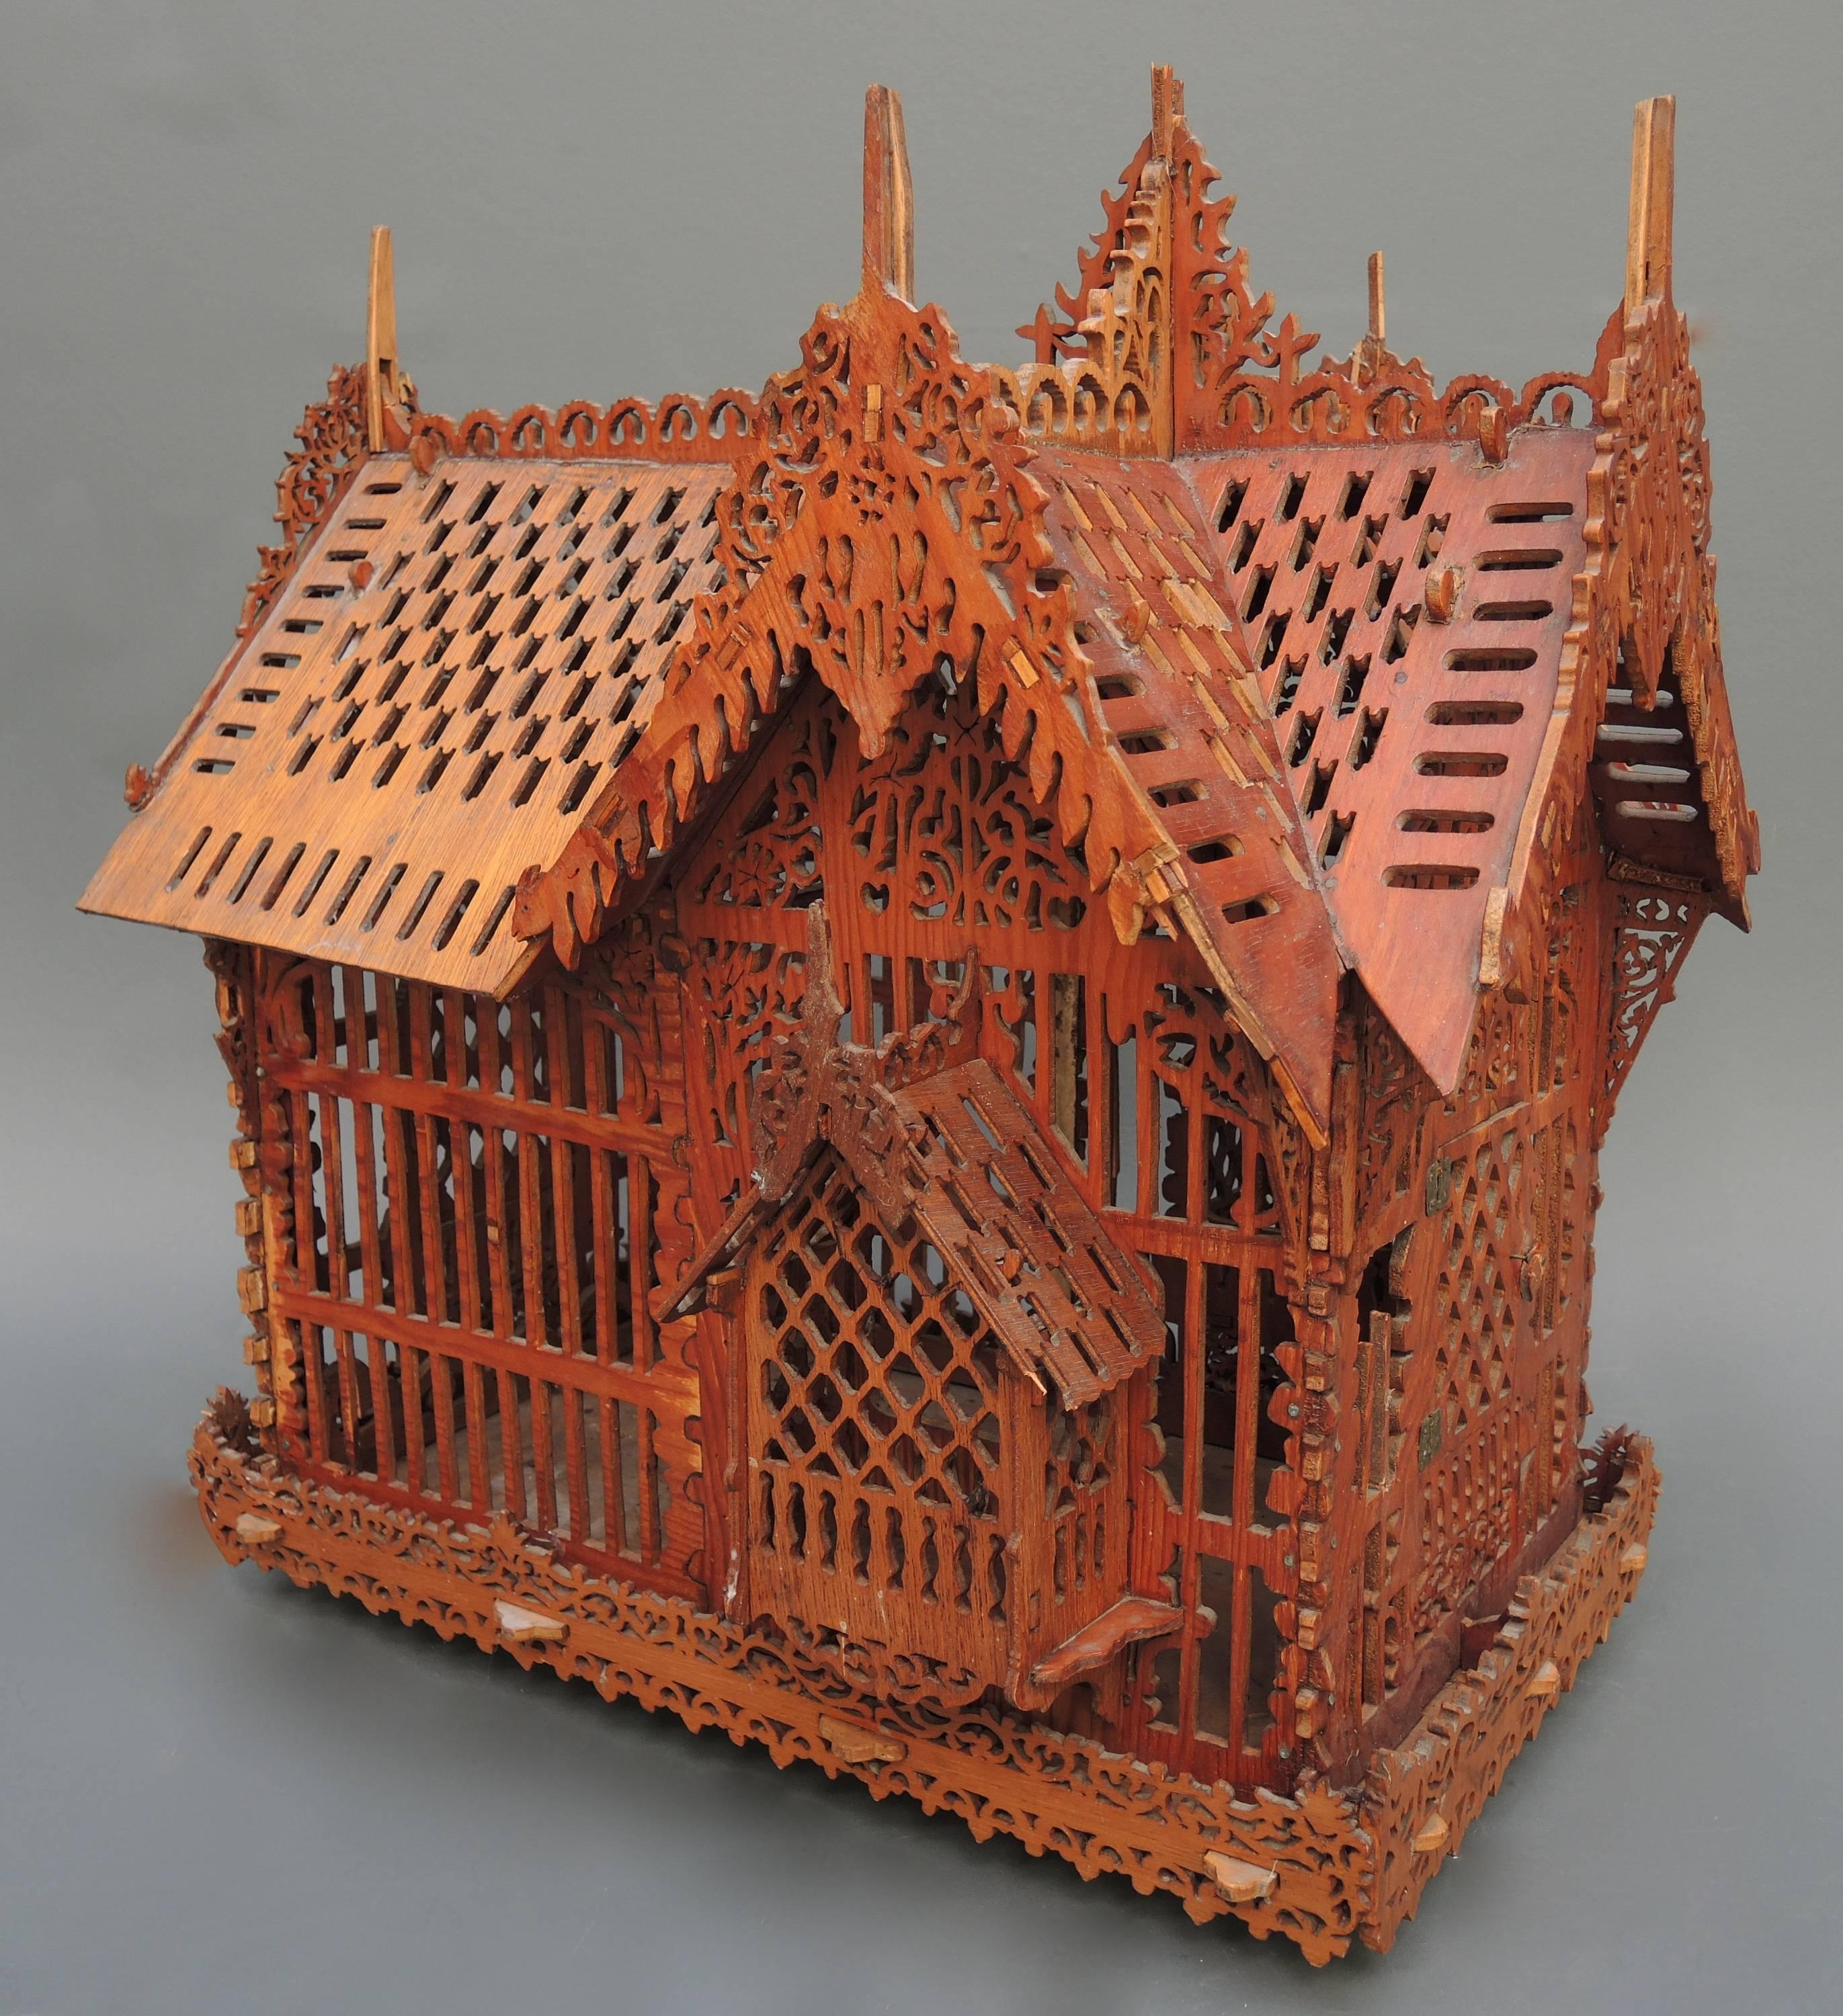 A very unique Folk Art bird cage completely made of fretwork cut wood. 
Fretwork cutting was a very popular Craft in the Netherlands from the mid-19th century up until the beginning of the 1900s. Small shelves and boxes made from cigar boxes and